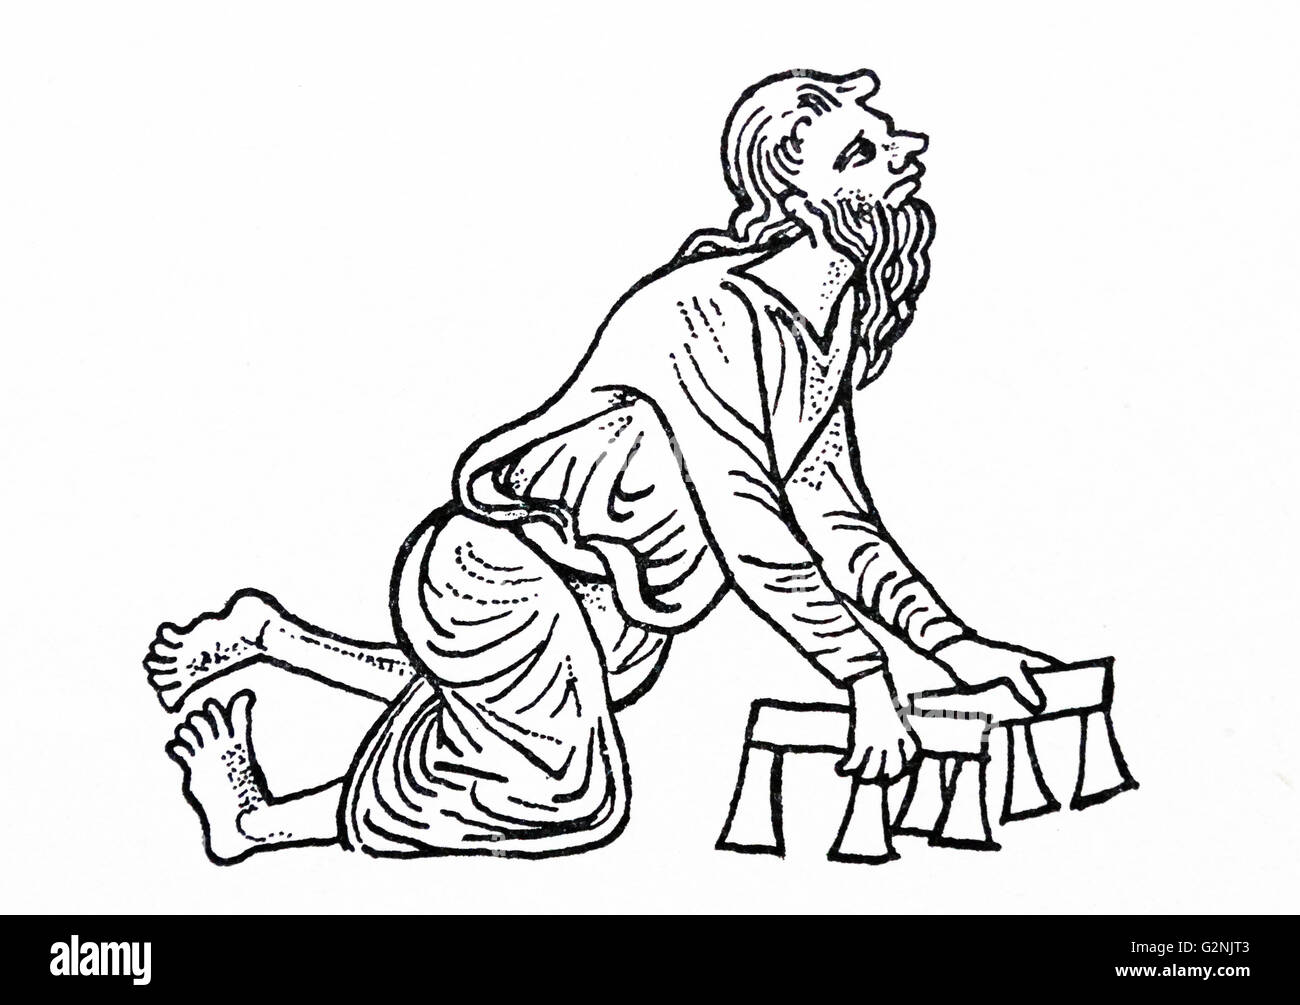 Illustration of a man with a deformed foot and crude crutches. Dated 14th Century Stock Photo